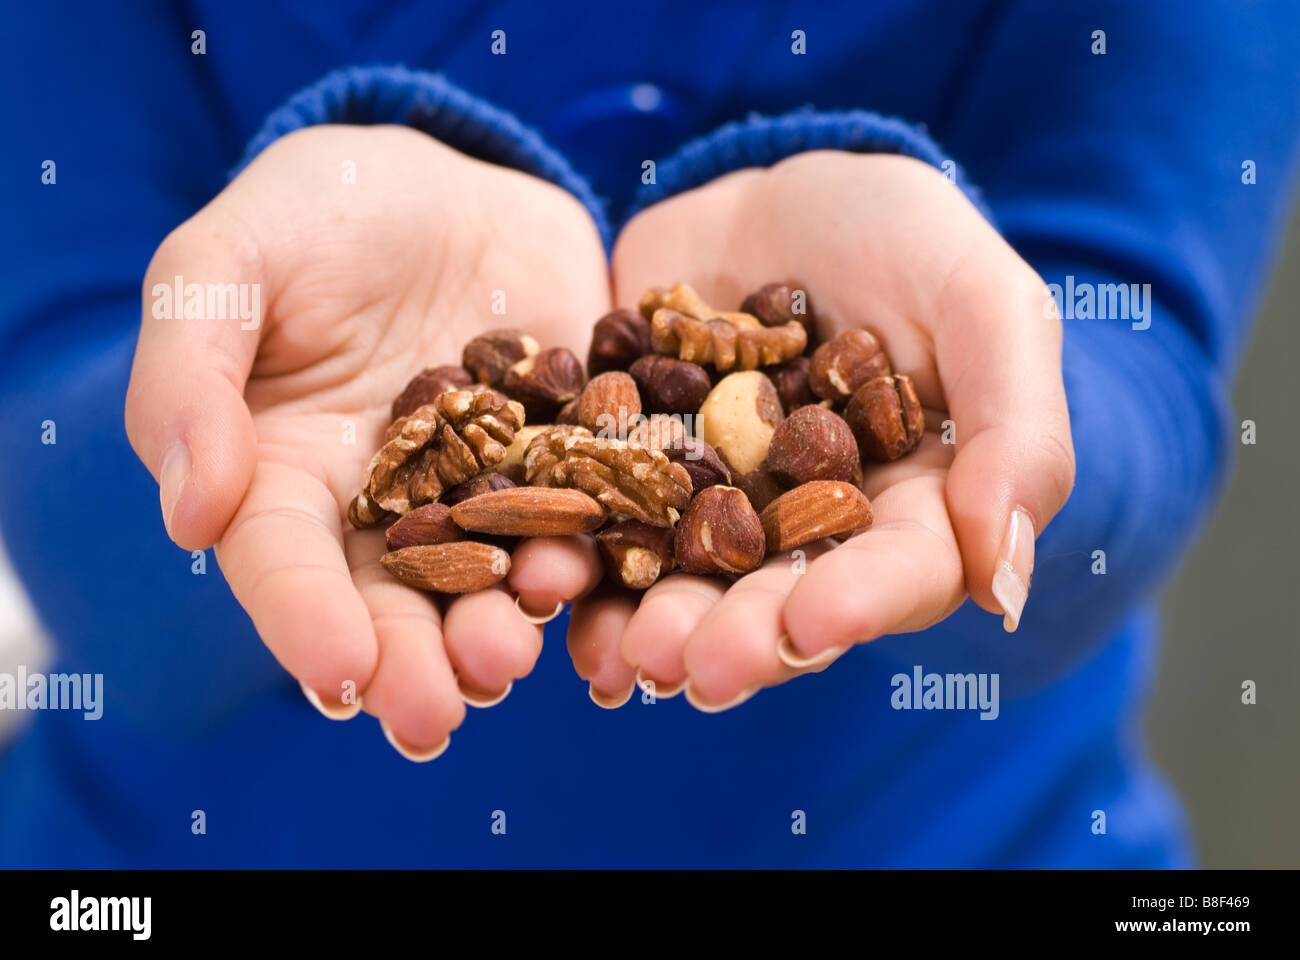 Woman's hand holding nuts Stock Photo